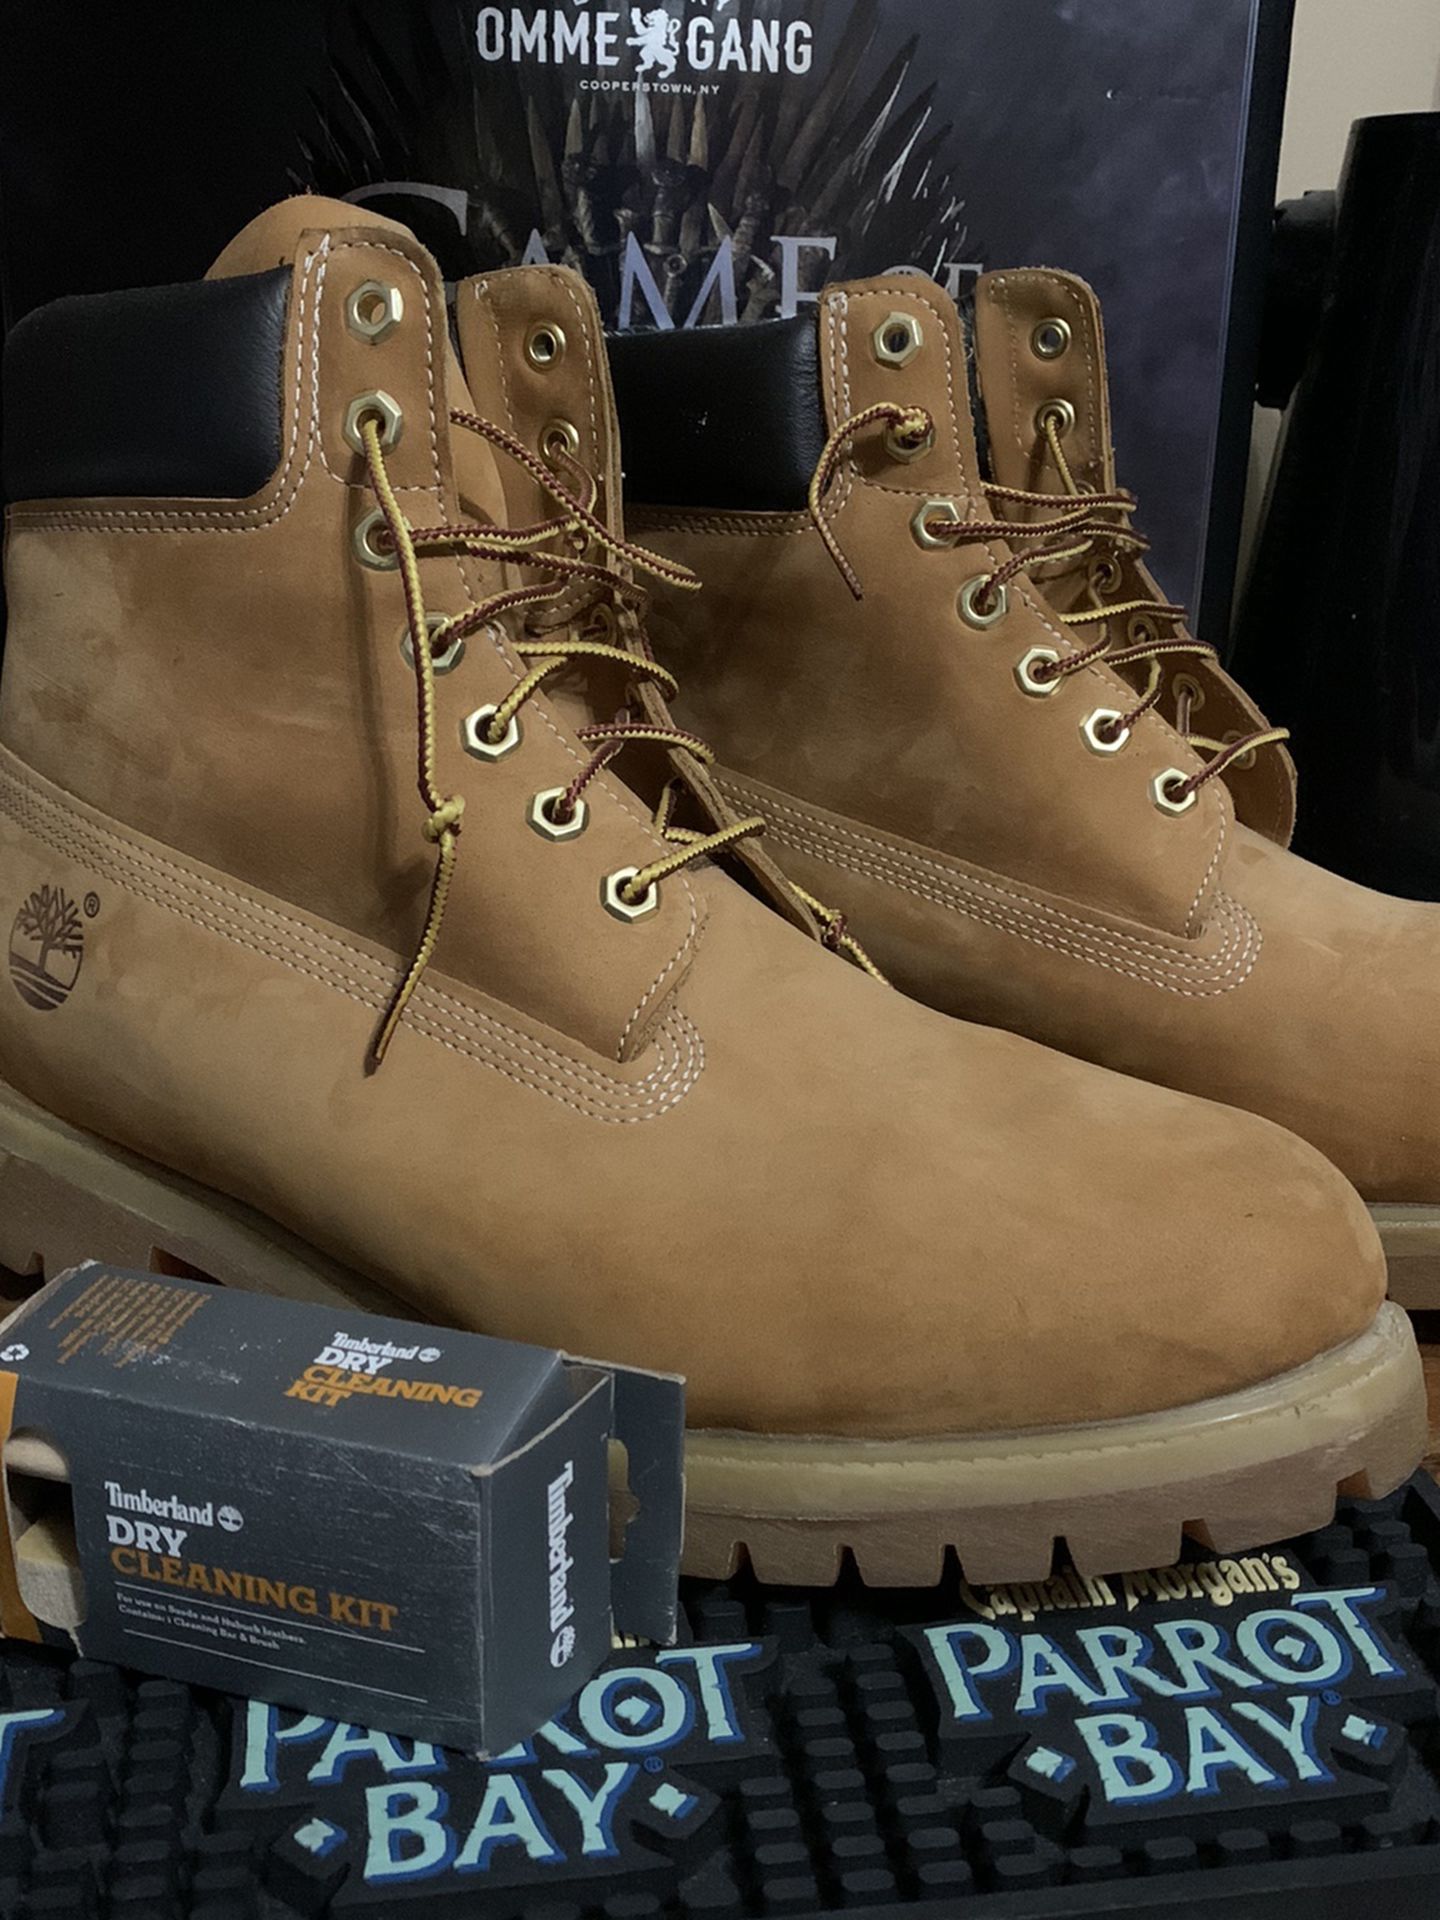 TIMBERLAND MEN'S 6-INCH PREMIUM WATERPROOF BOOTS - BUTTERS // BRAND NEW + TIMBERLAND BRAND CLEANER